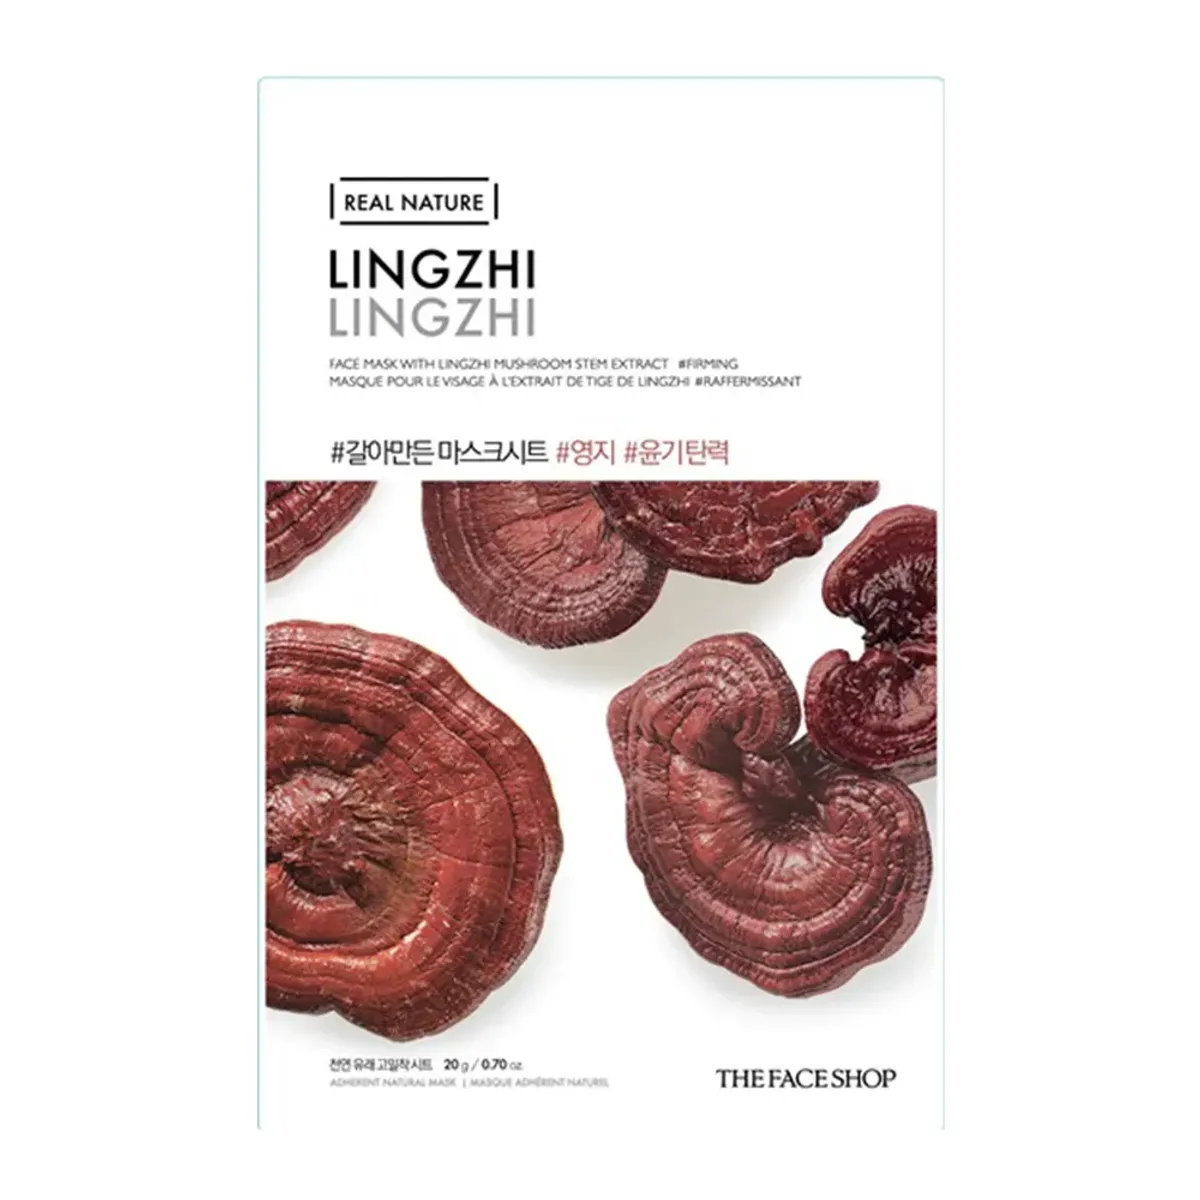 thefaceshop-real-nature-lingzhi-face-mask-1-6